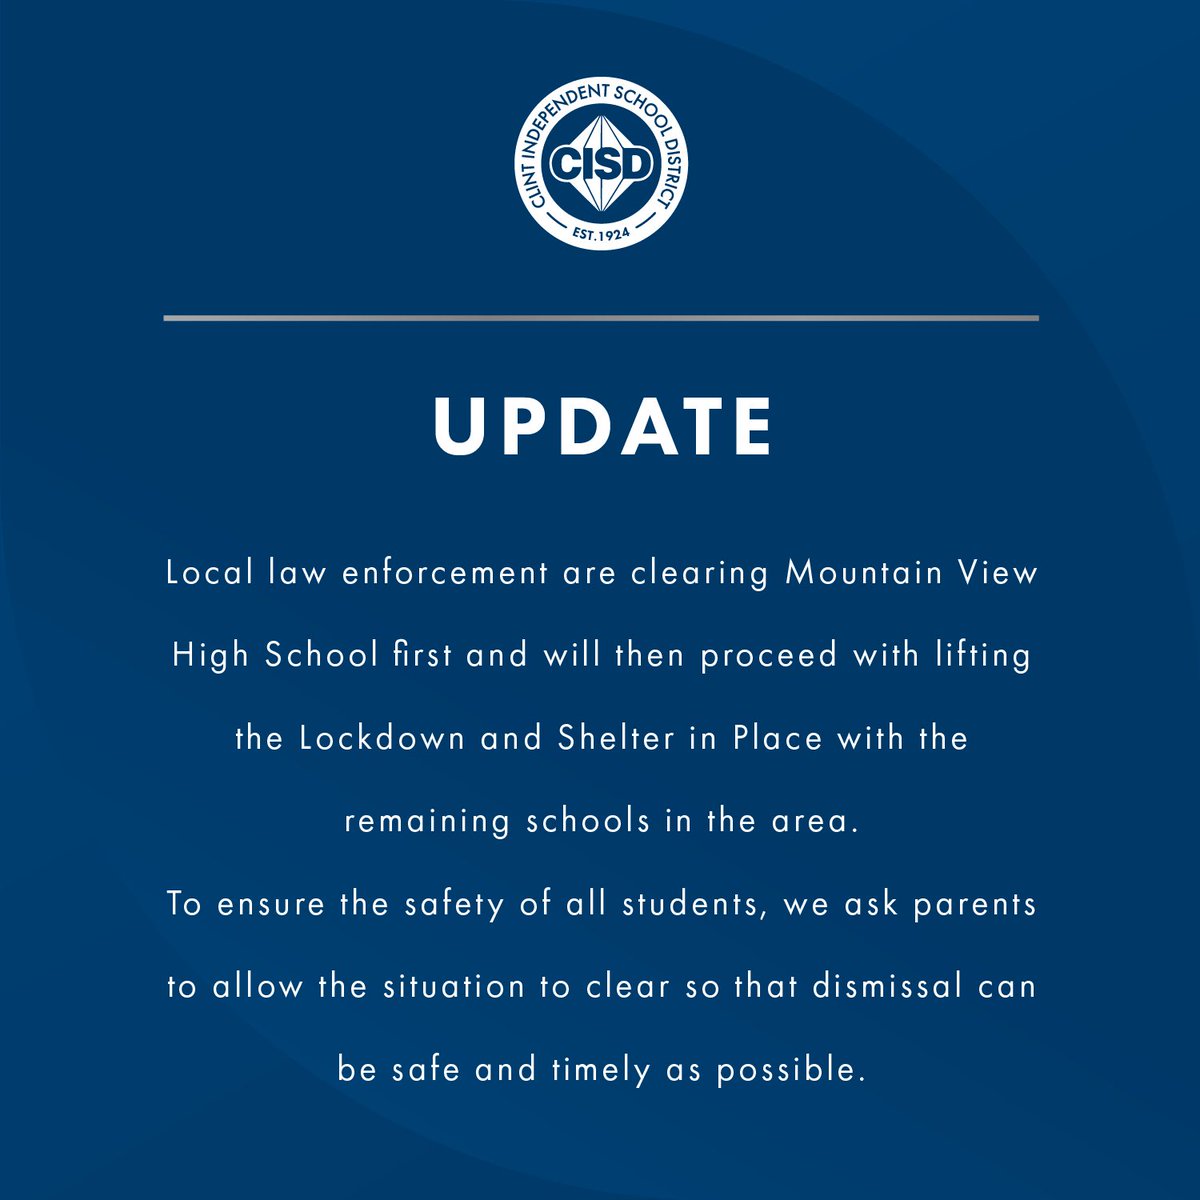 Law enforcement are clearing Mountain View HS first and will then proceed with lifting the Lockdown & Shelter in Place with other schools in the area. To ensure the safety, we ask parents to allow the situation to clear so that dismissal can be safe and timely as possible.